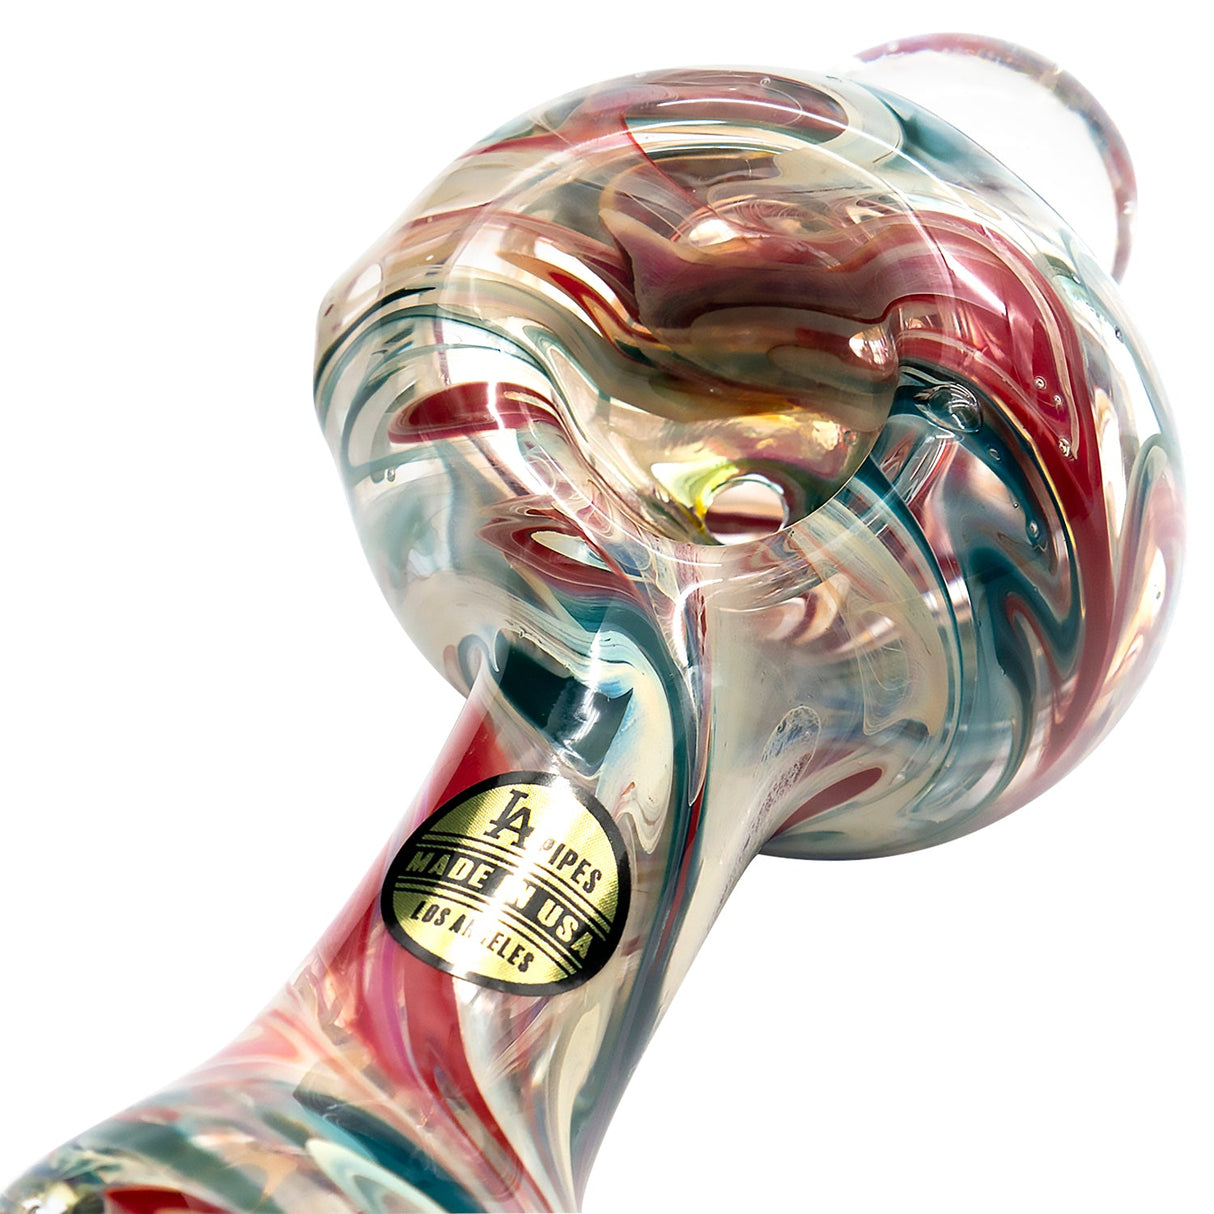 LA Pipes "Primordial Ooze" Glass Spoon Pipe, Fumed Color Changing, 4.5" Length, Angled View